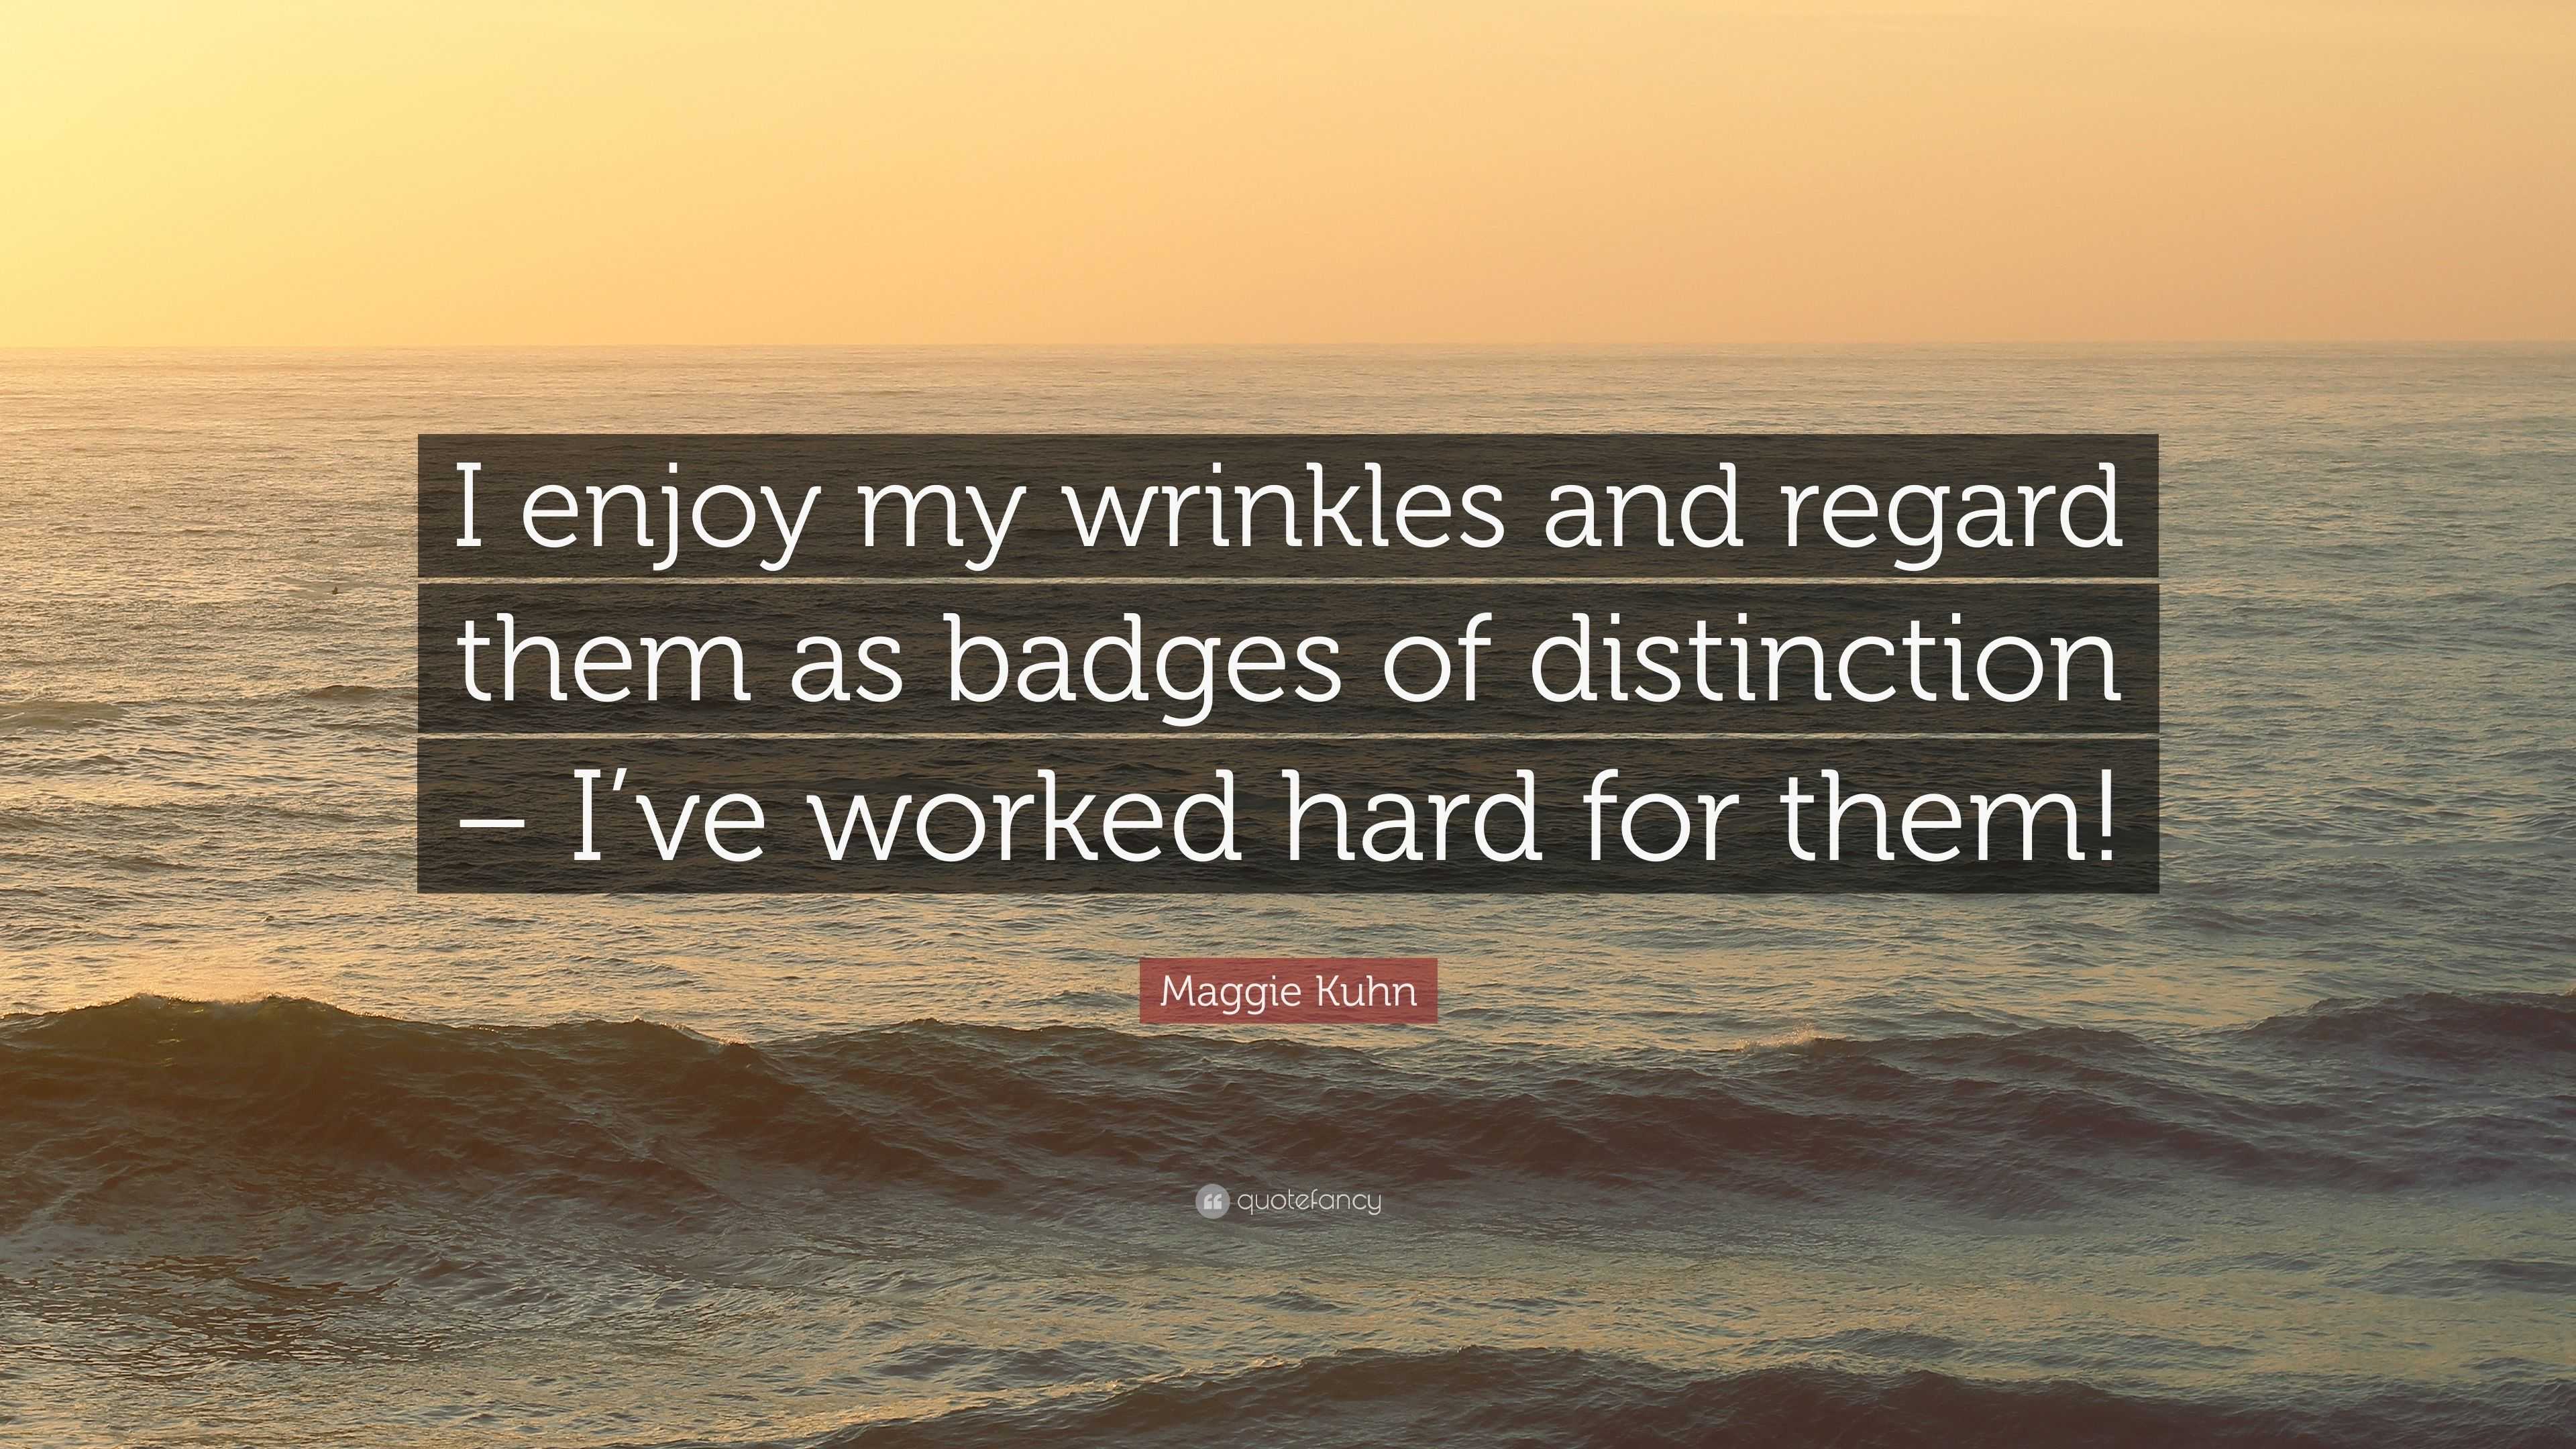 Maggie Kuhn Quote: “I enjoy my wrinkles and regard them as badges